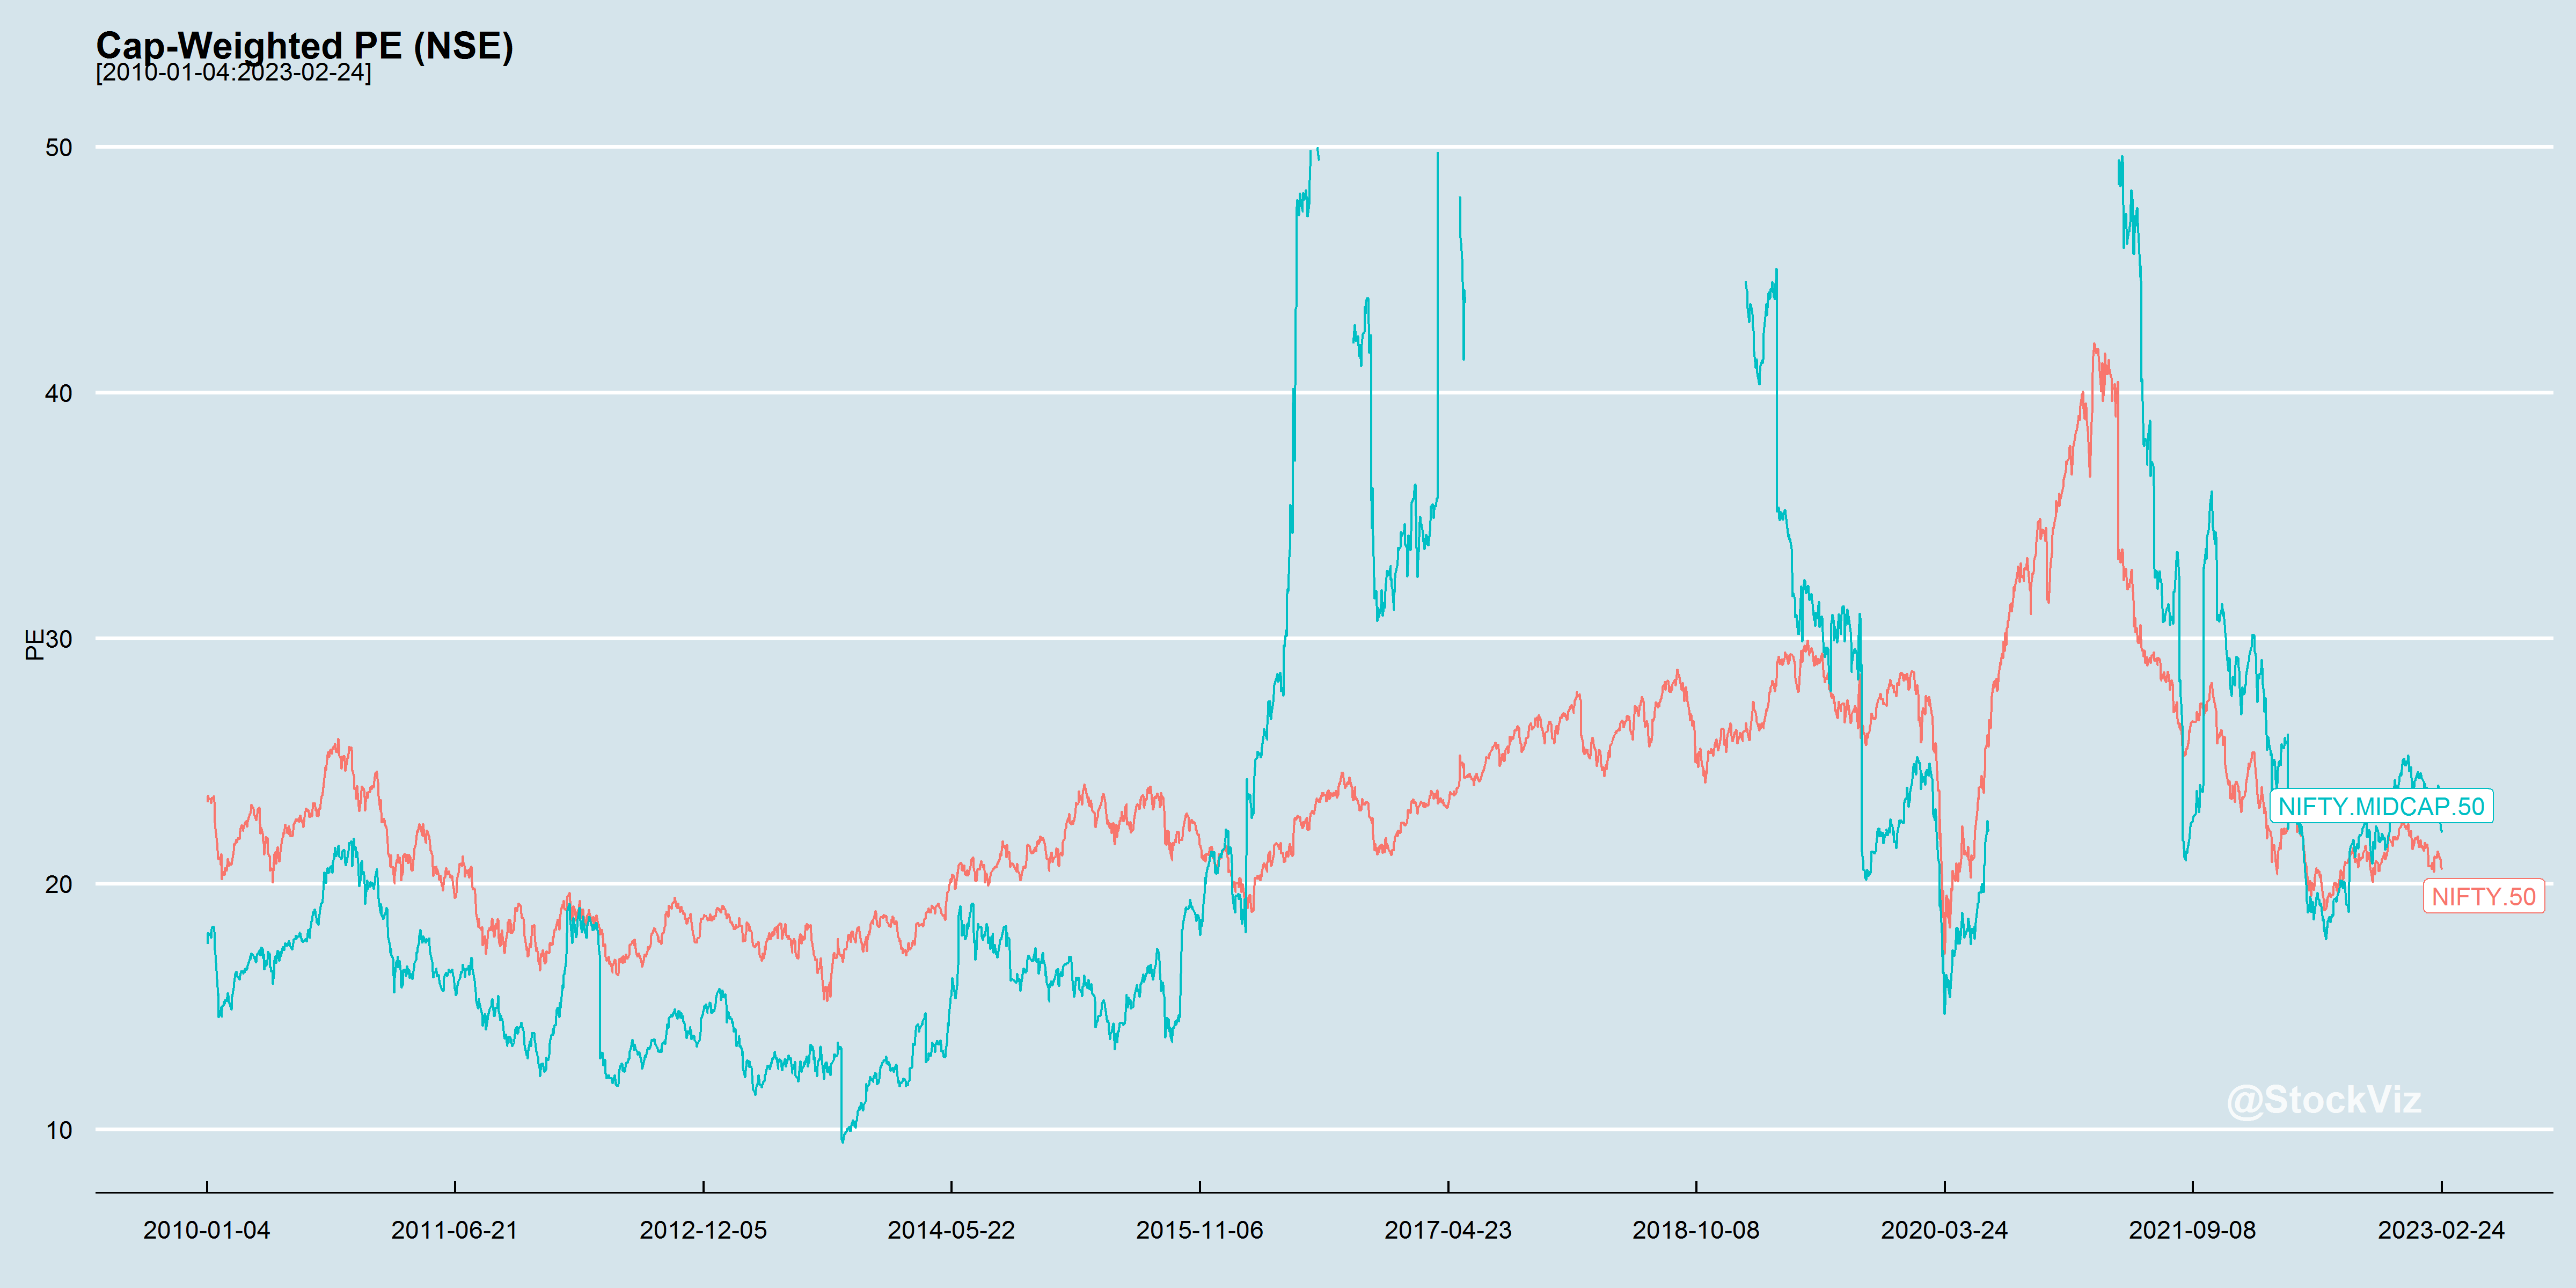 Cap-Weighted PE chart